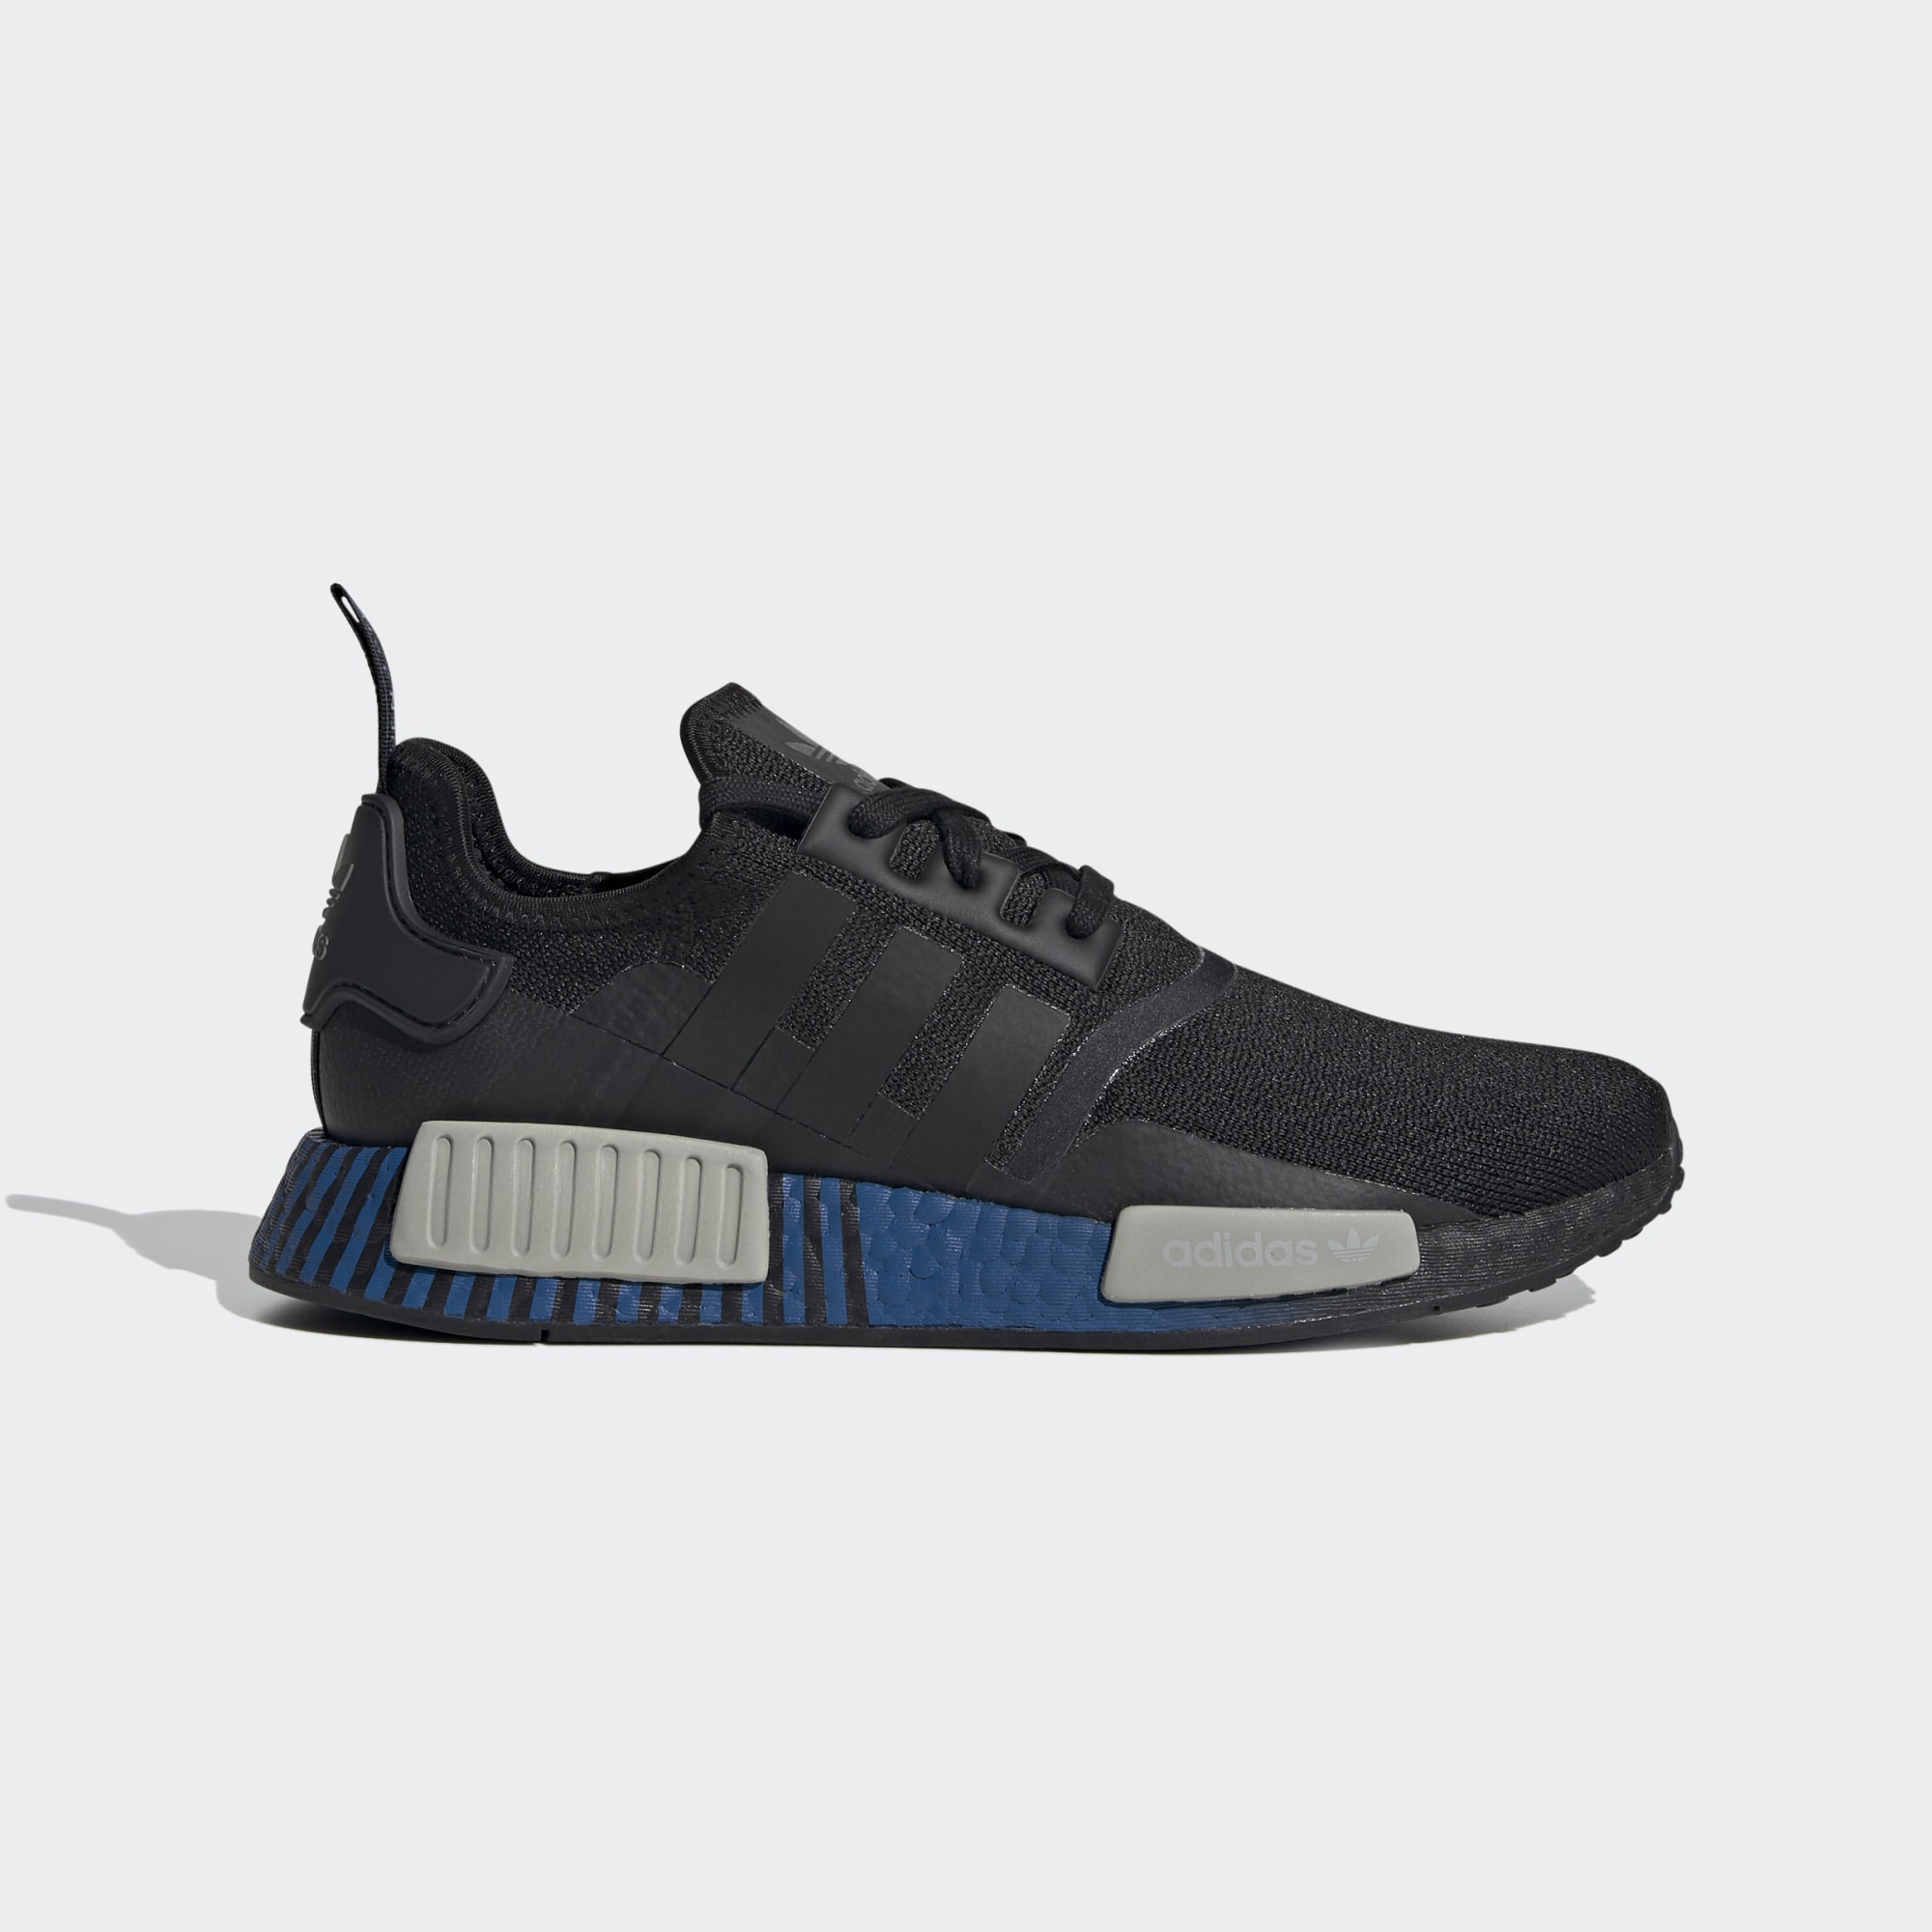 nmd_r1 boost shoes